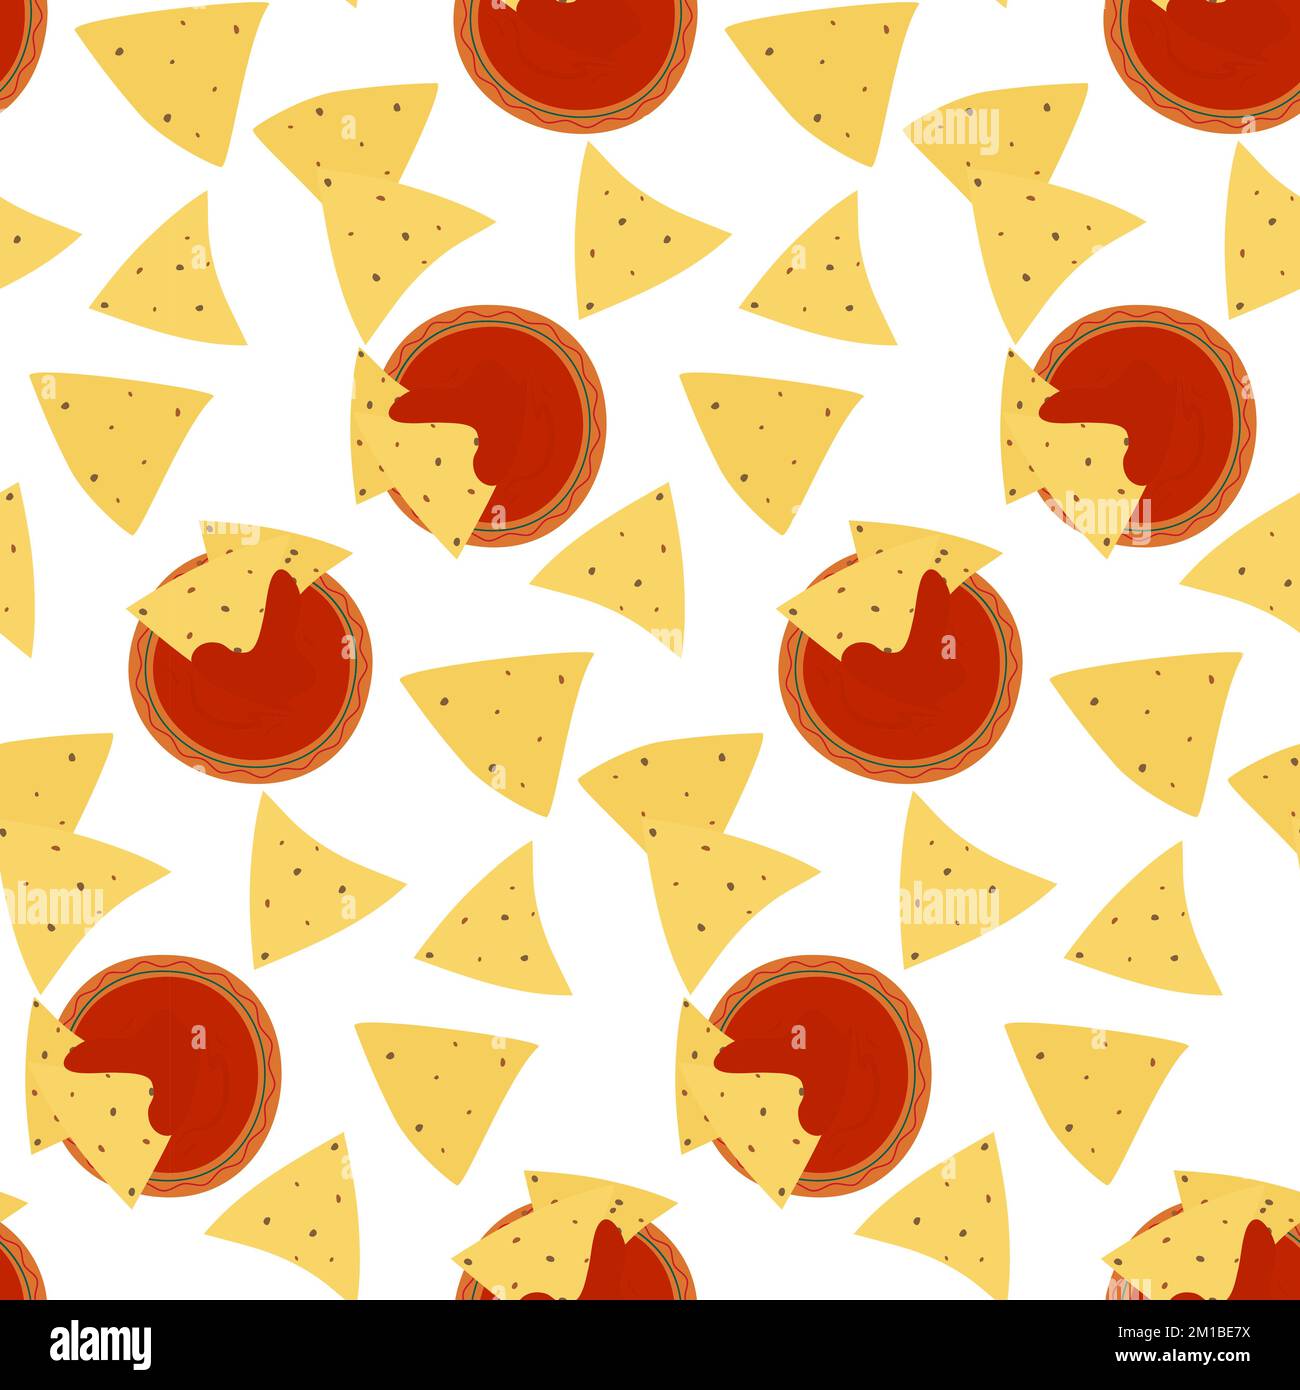 Endless pattern with traditional nachos corn chips and red tomato sauce in cartoon style. Mexican food. Good for web, wallpaper, poster, cards or invitation, label, menu for bars and restaurants. EPS Stock Vector